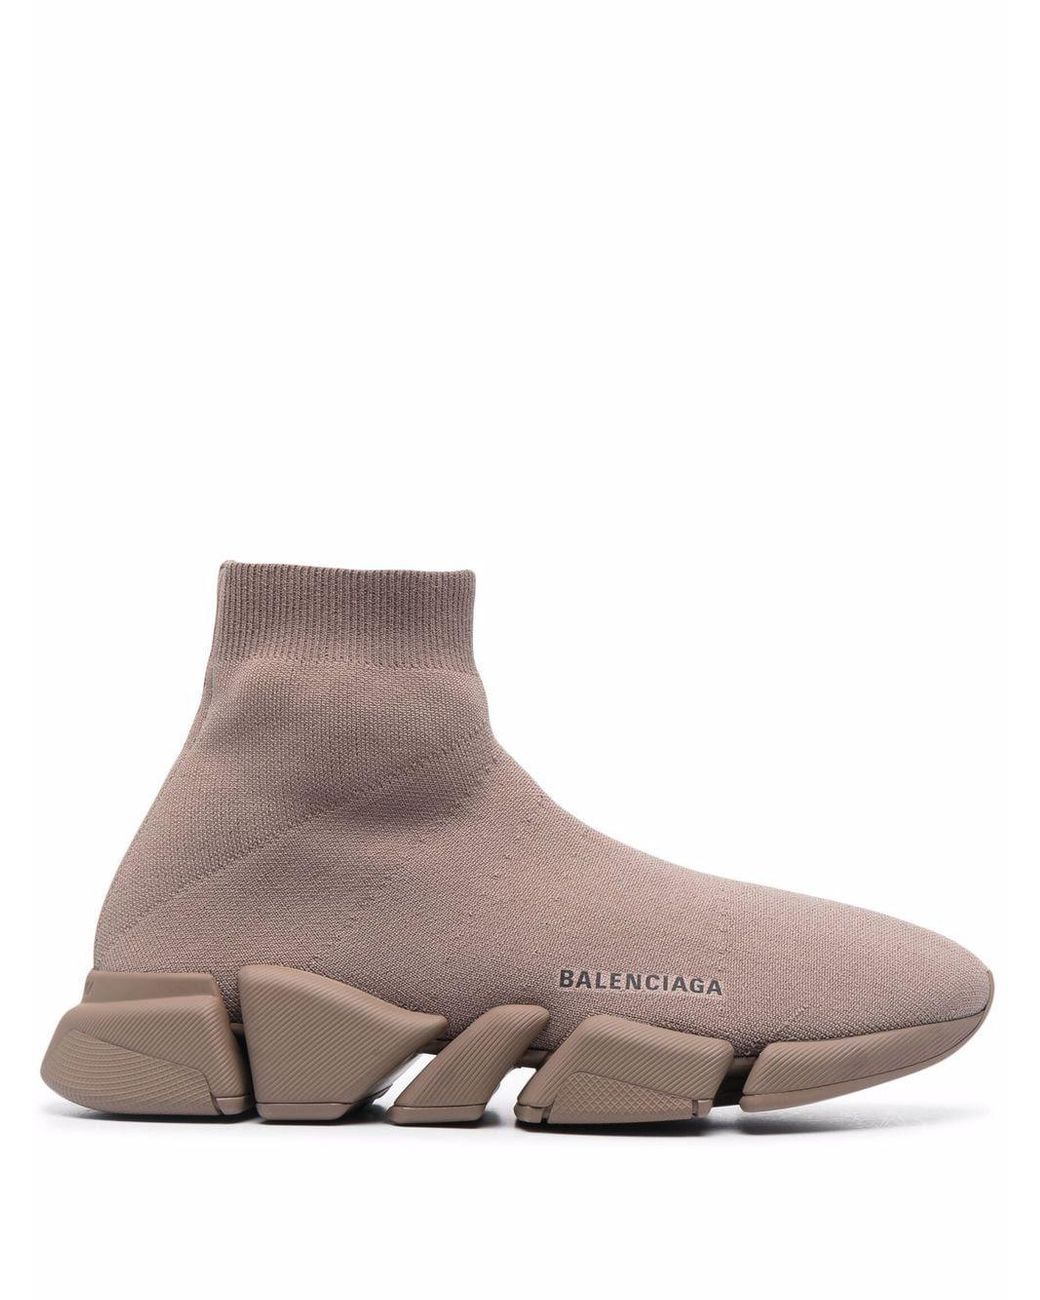 Balenciaga Rubber Speed 2.0 Pull-on Sneakers in Beige (Natural) for Men ...